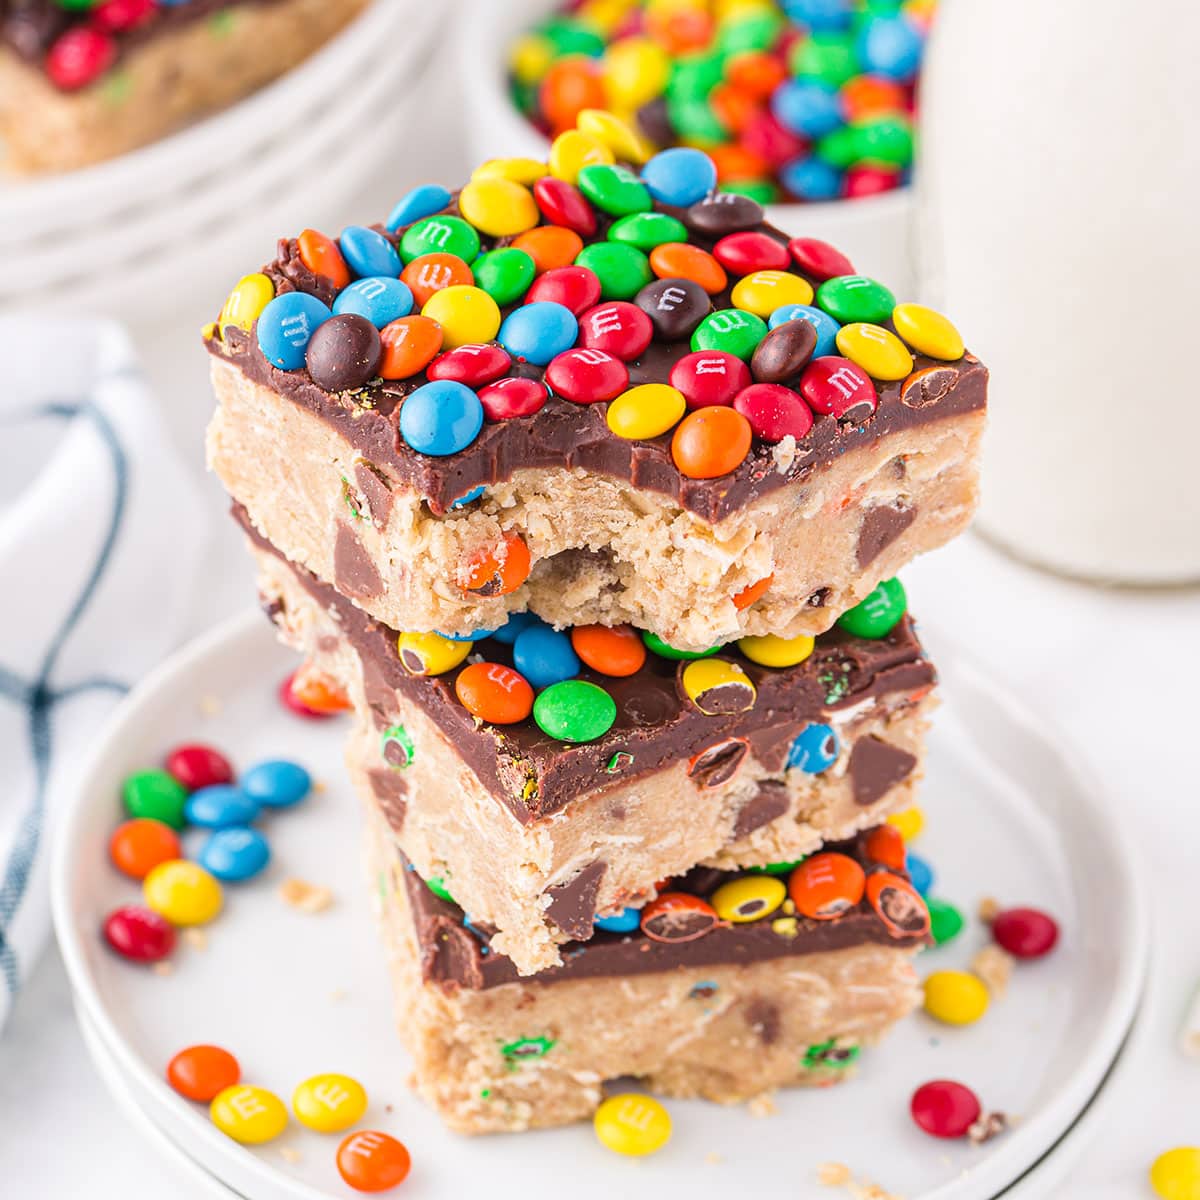 Milk Bar Teams Up with M&M's to Launch Tasty New Cookie